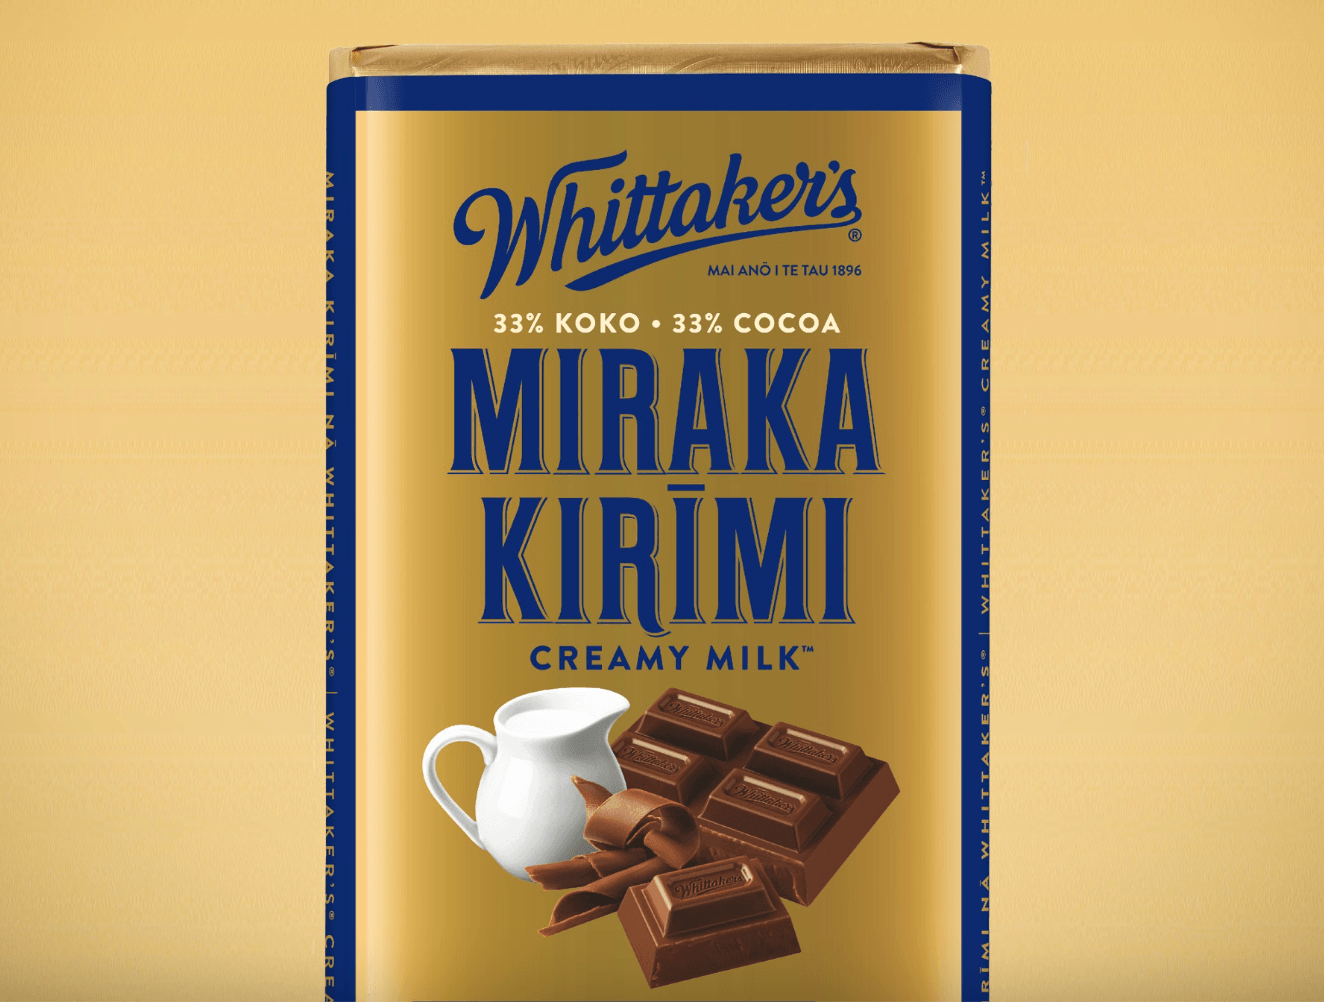 Whittaker’s new te reo packaging praised for being… normal